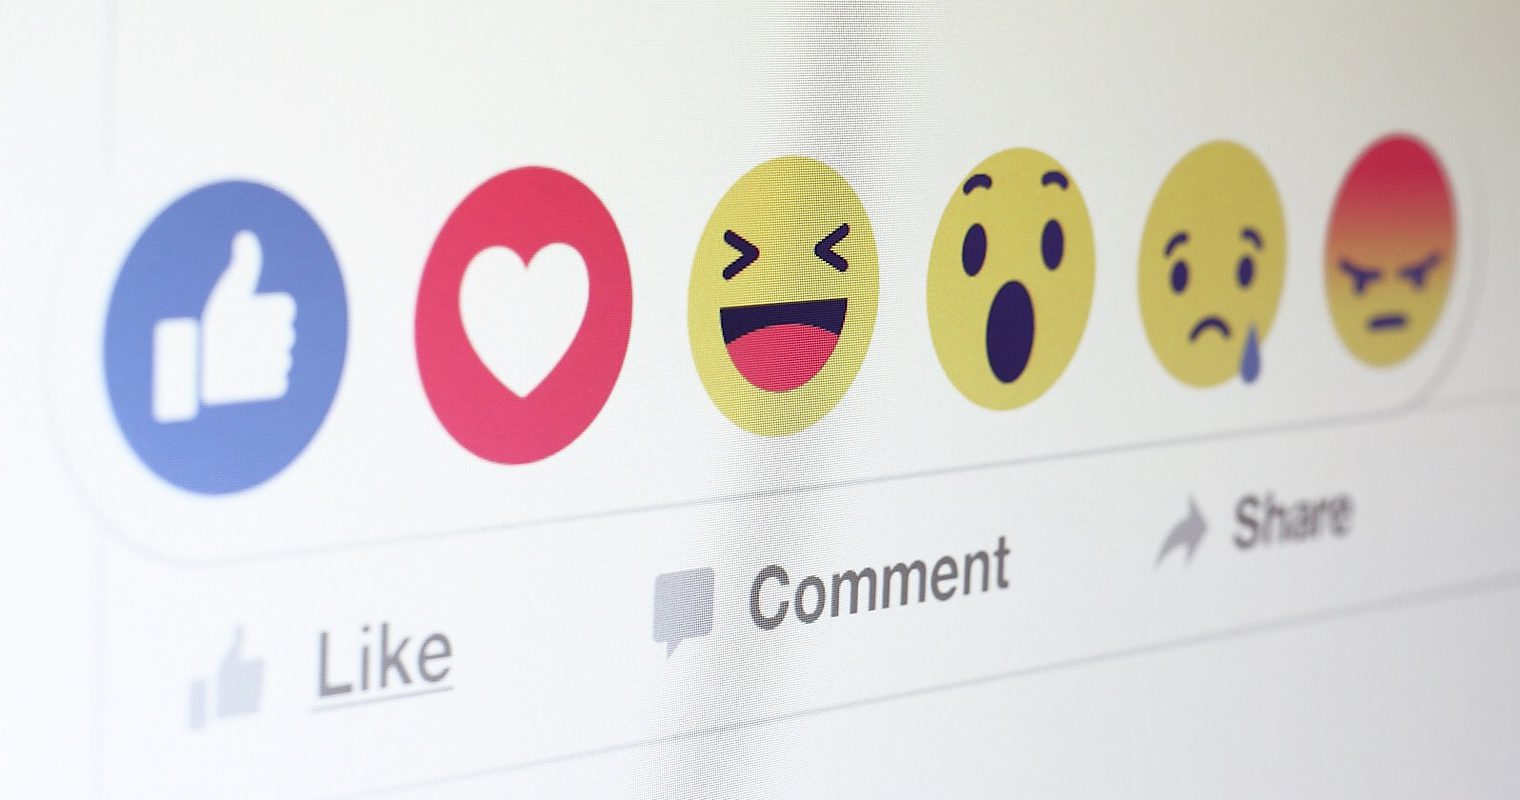 Facebook Puts an End to Temporary Reaction Buttons